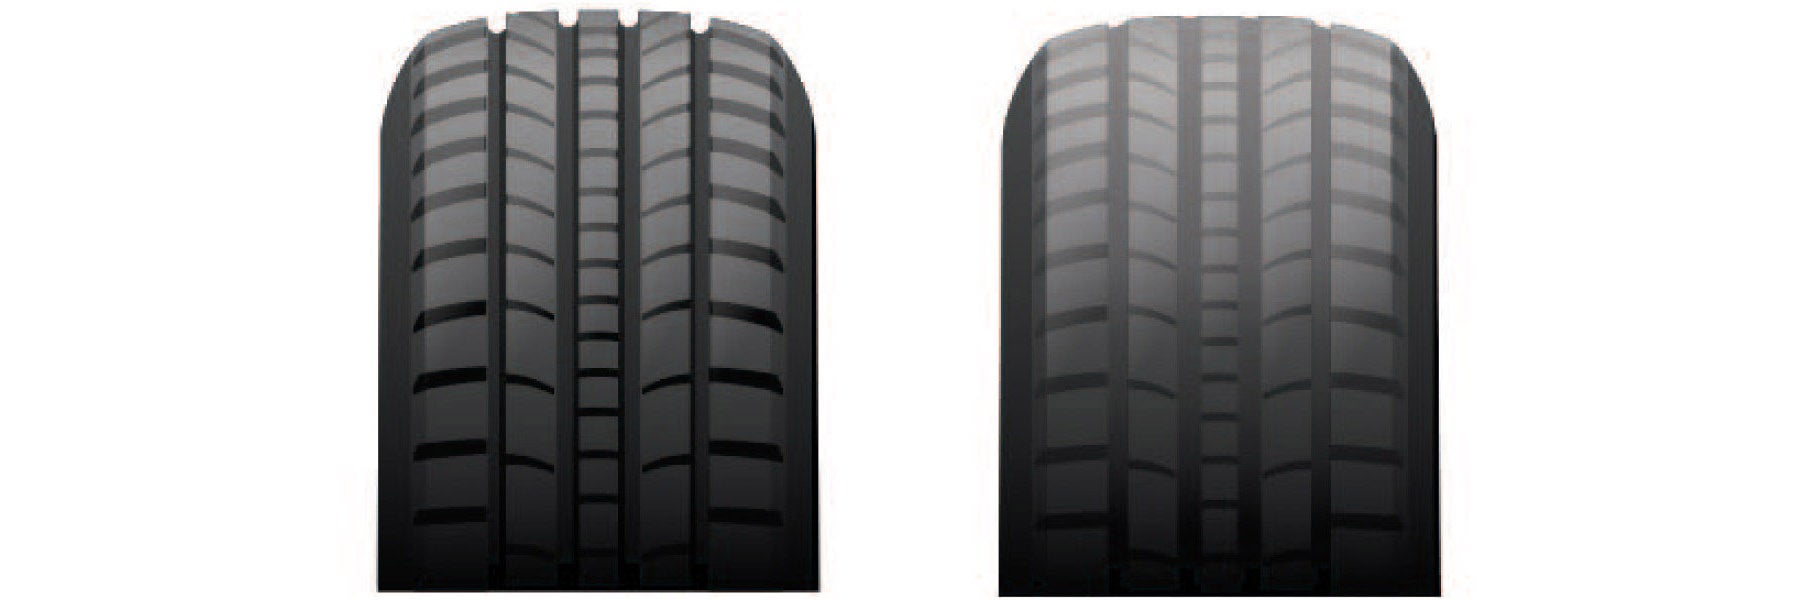 Tire tread depth comparison at Clay Cooley Kia Irving in Irving TX